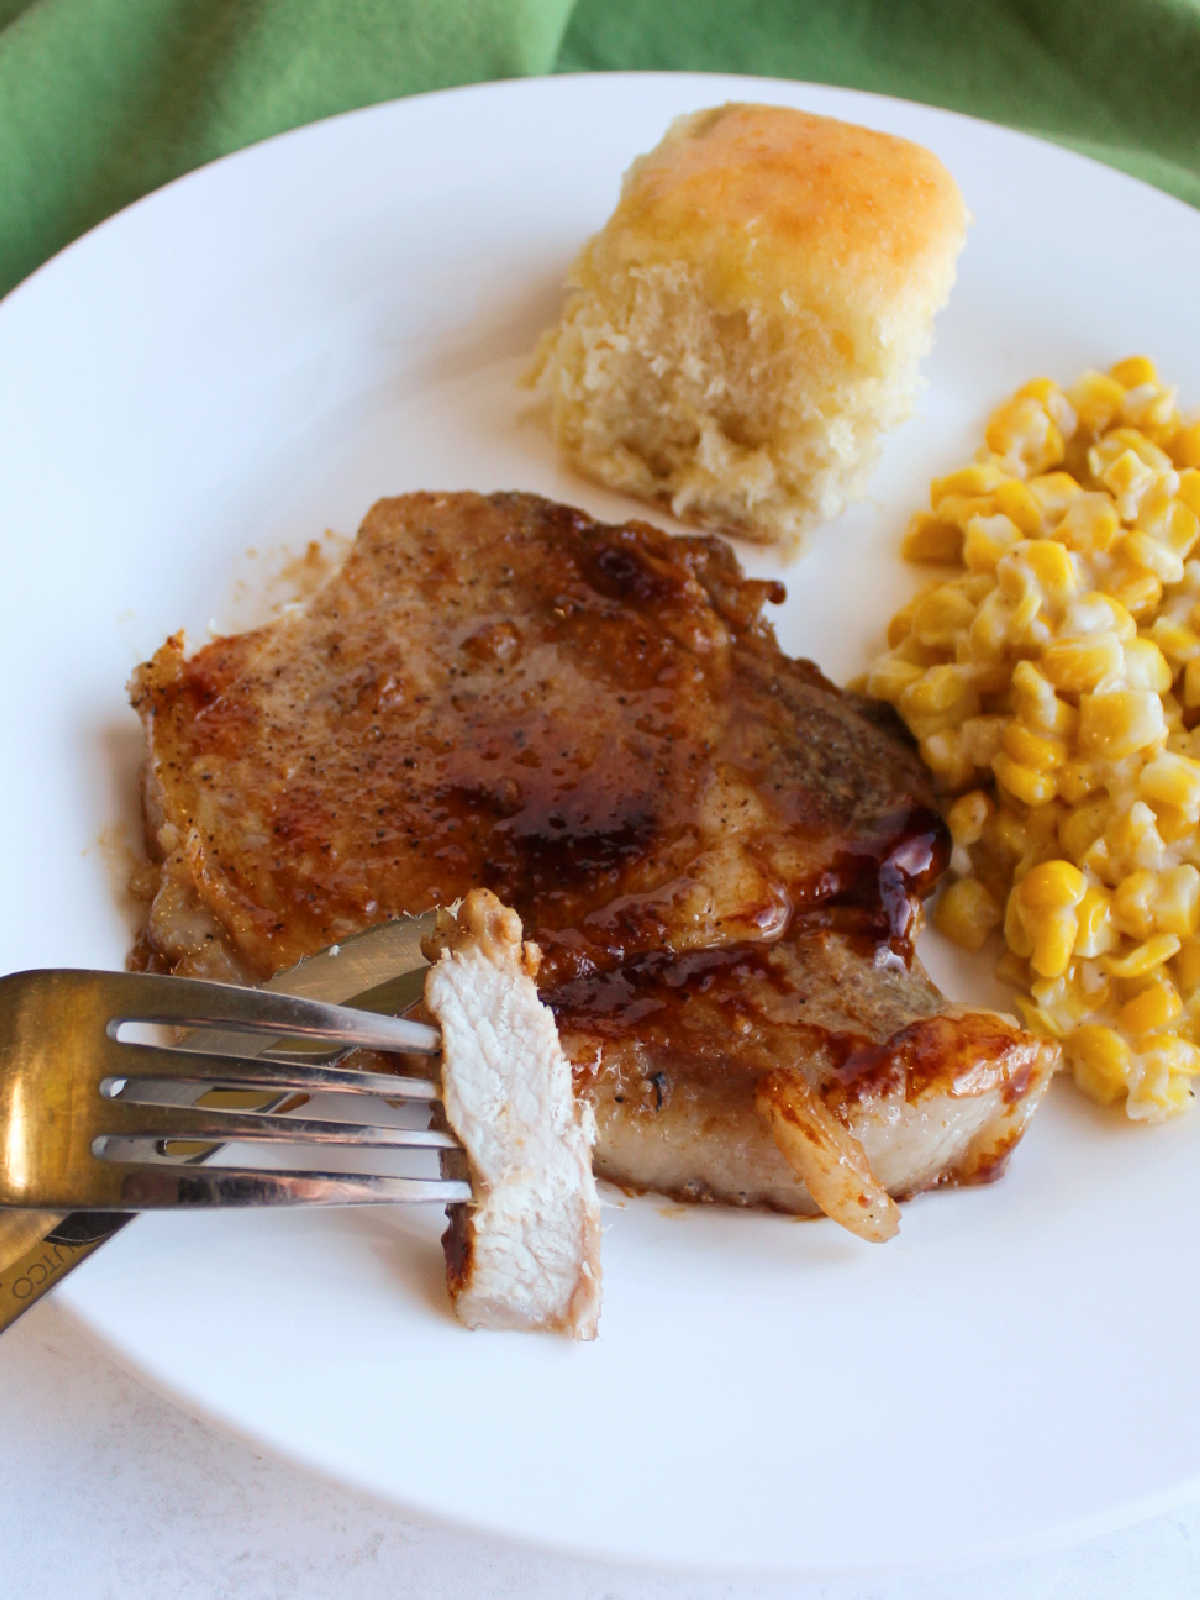 fork with tender piece of pork chop on it showing white center vs. dark sticky glaze on the outside.